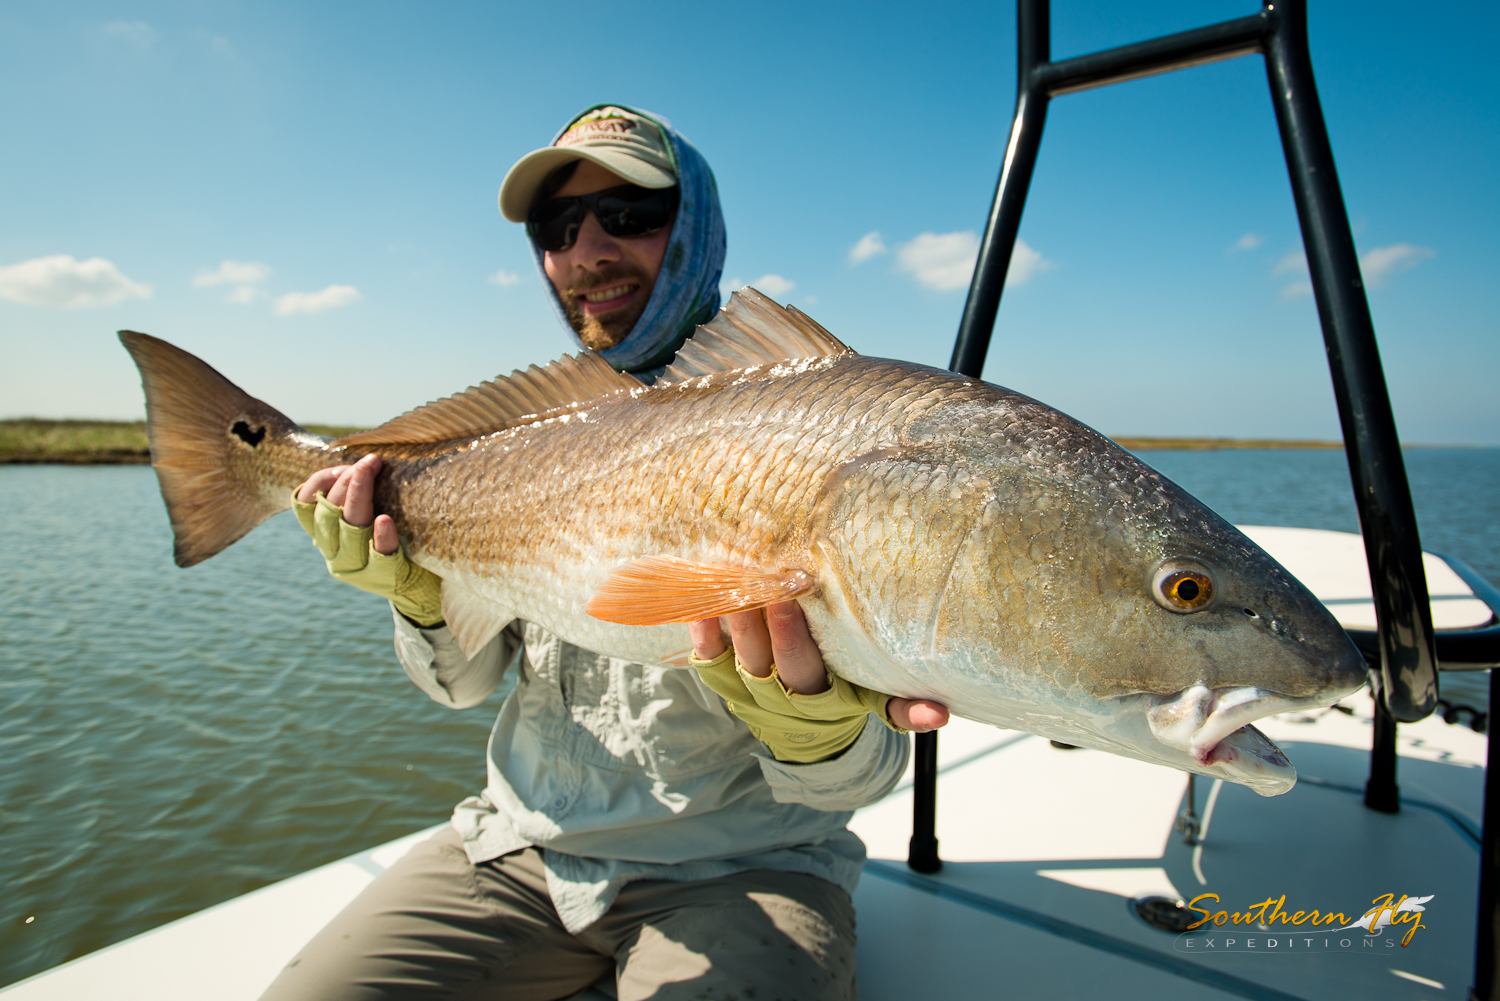 Wisconsin Anglers Fly Fishing New Orleans Southern Fly Expeditions